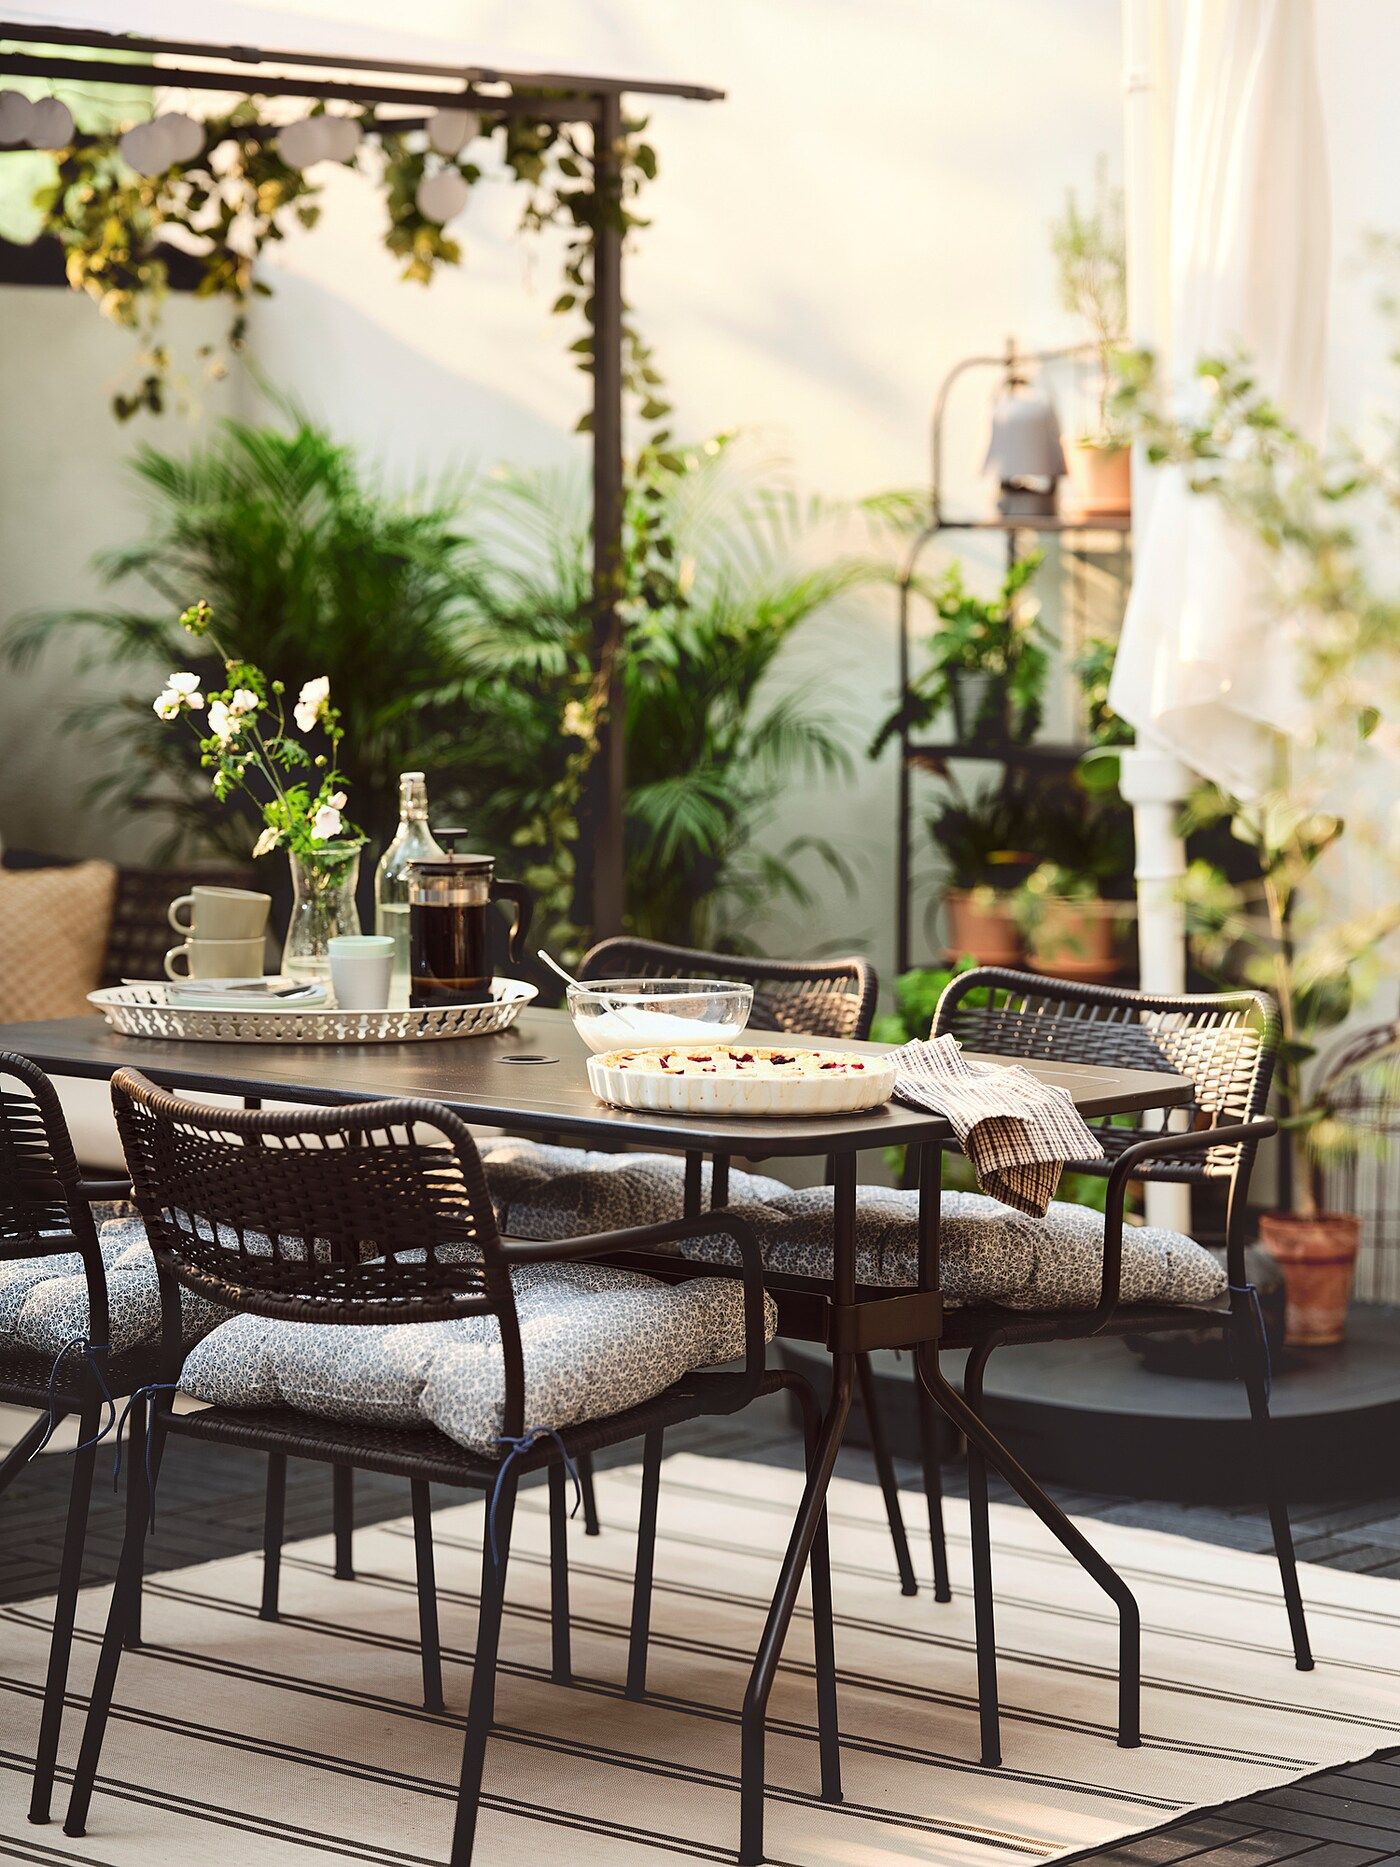 Enhance Your Outdoor Space with Stylish Garden Seating Sets